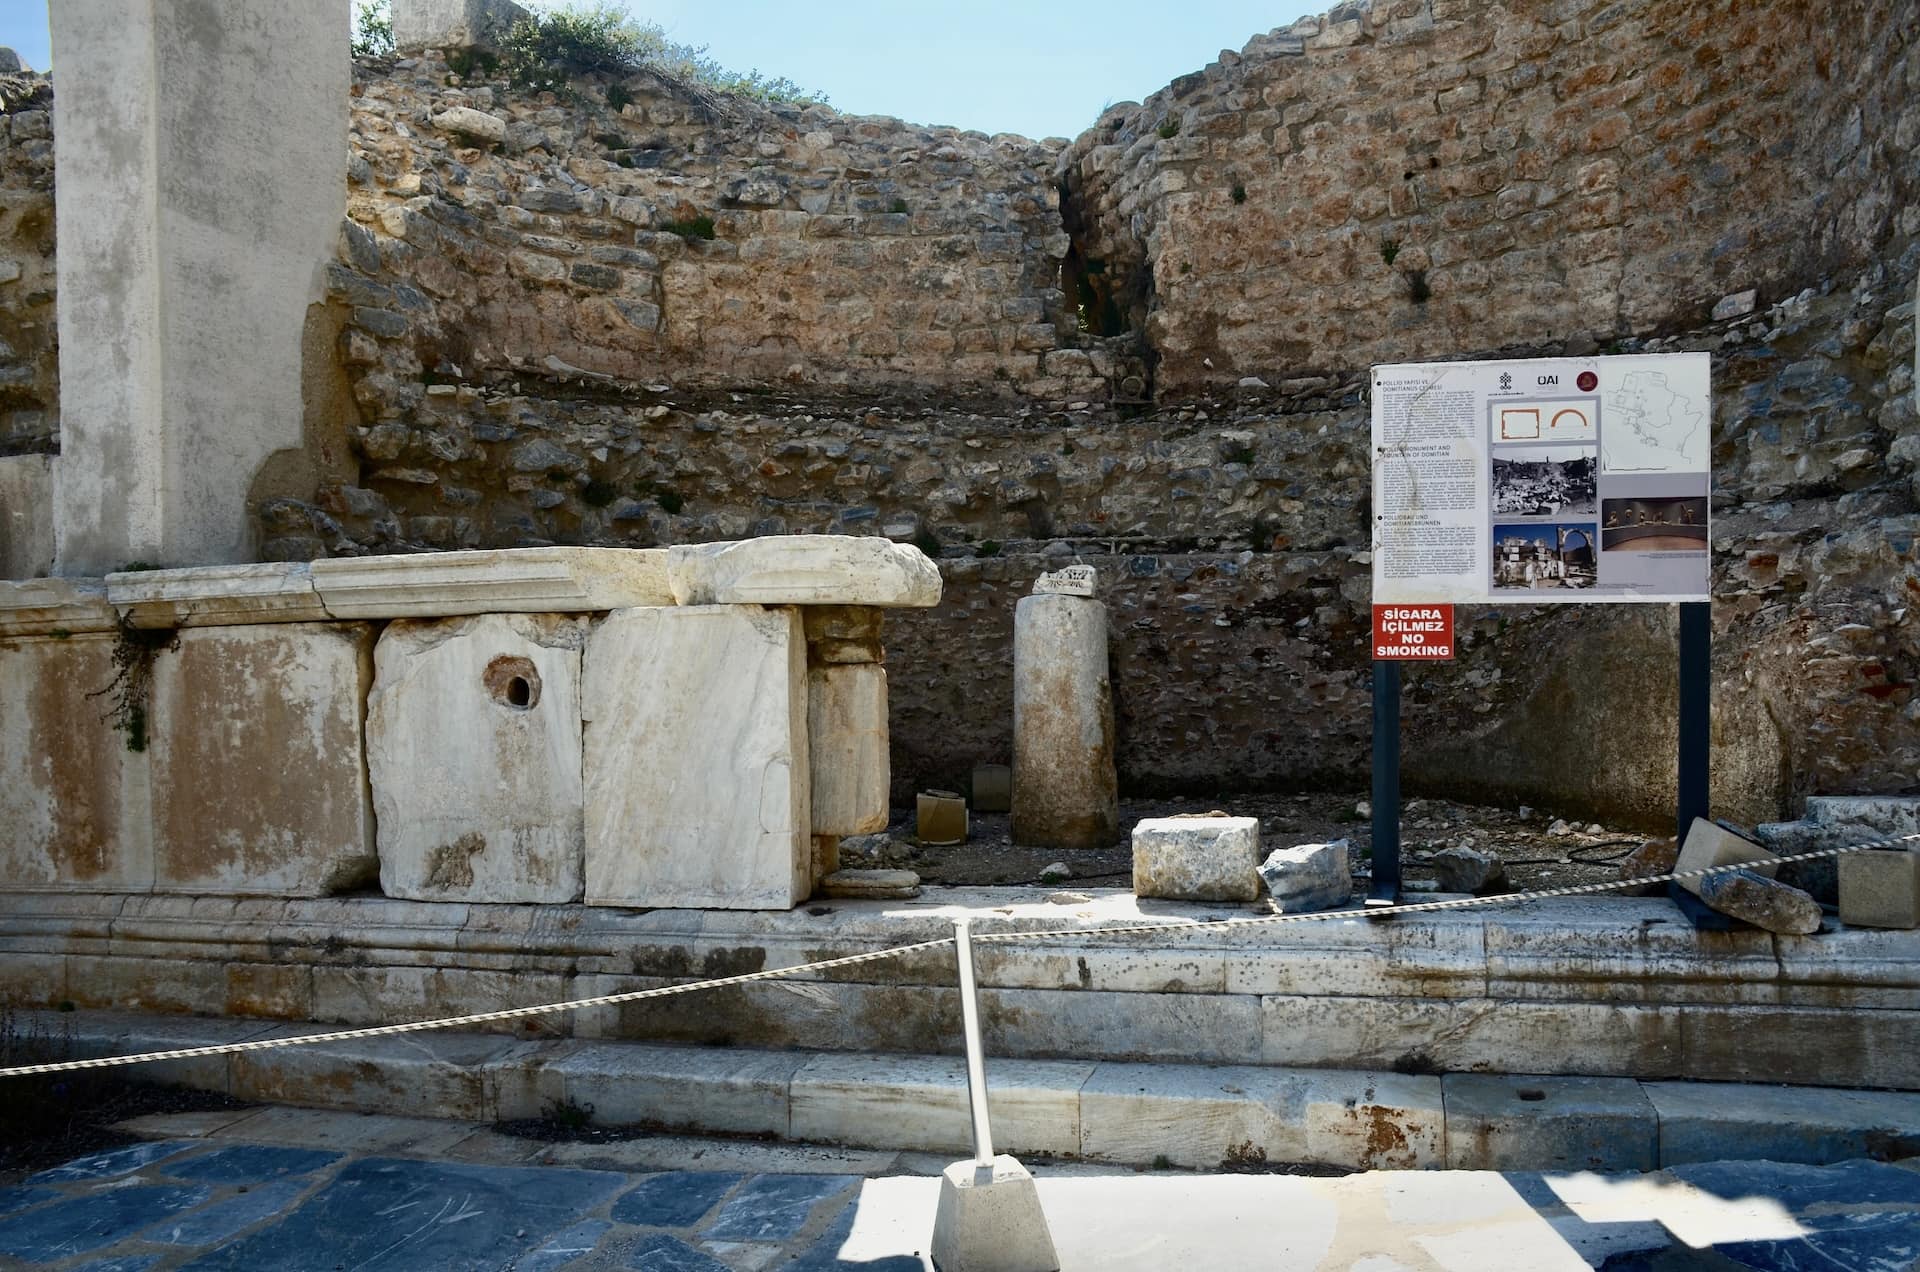 Pool and niche of the Fountain of Domitian